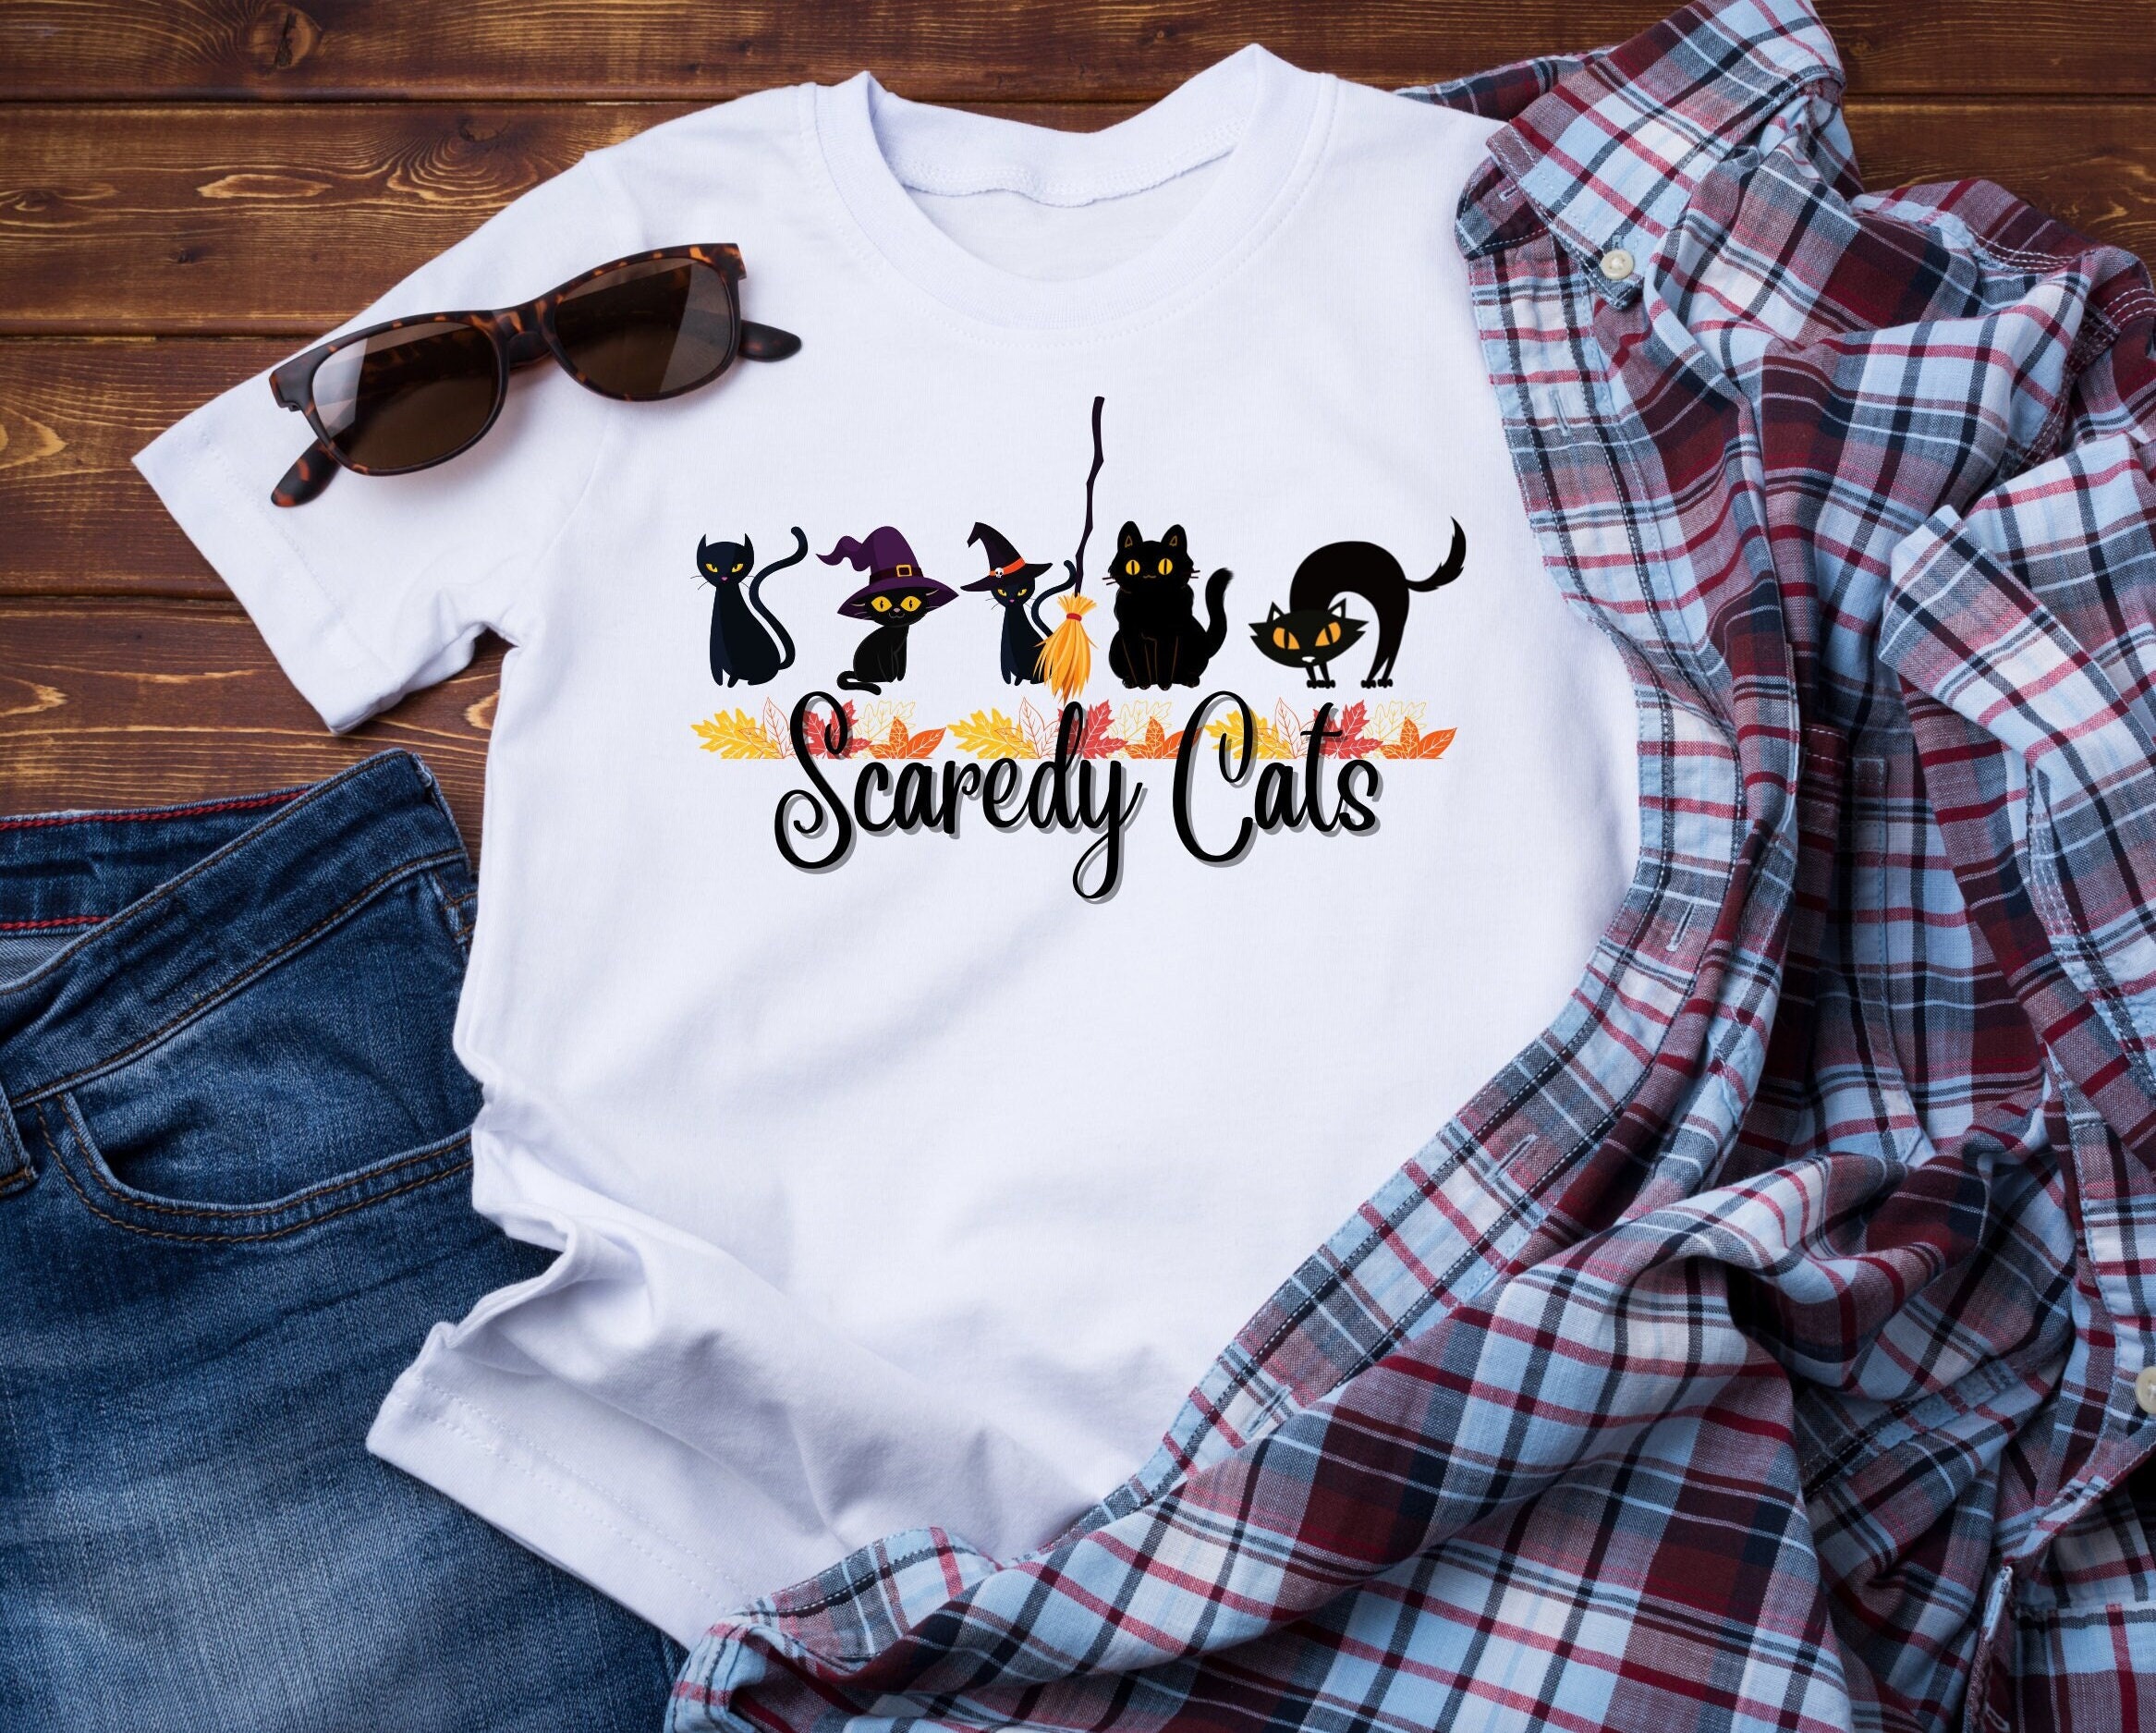 Scaredy Cats Logo tee – Thought Slime